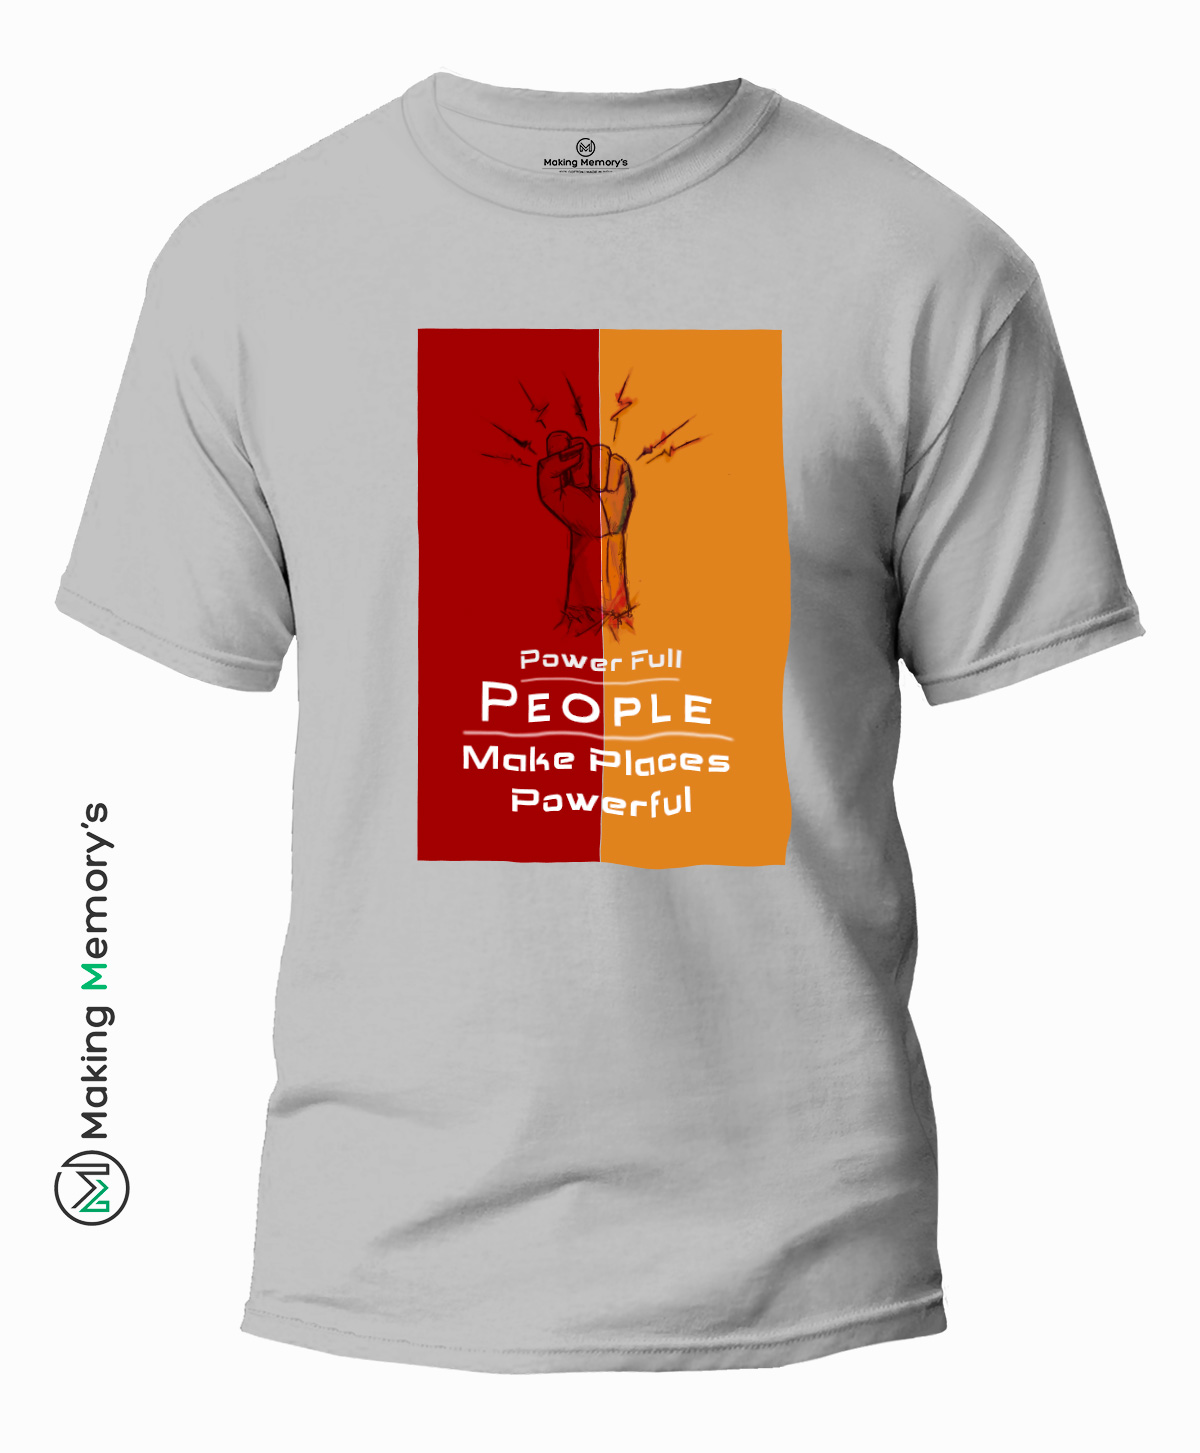 Power-Full-People-Make-Places-Powerful-Gray-T-Shirt